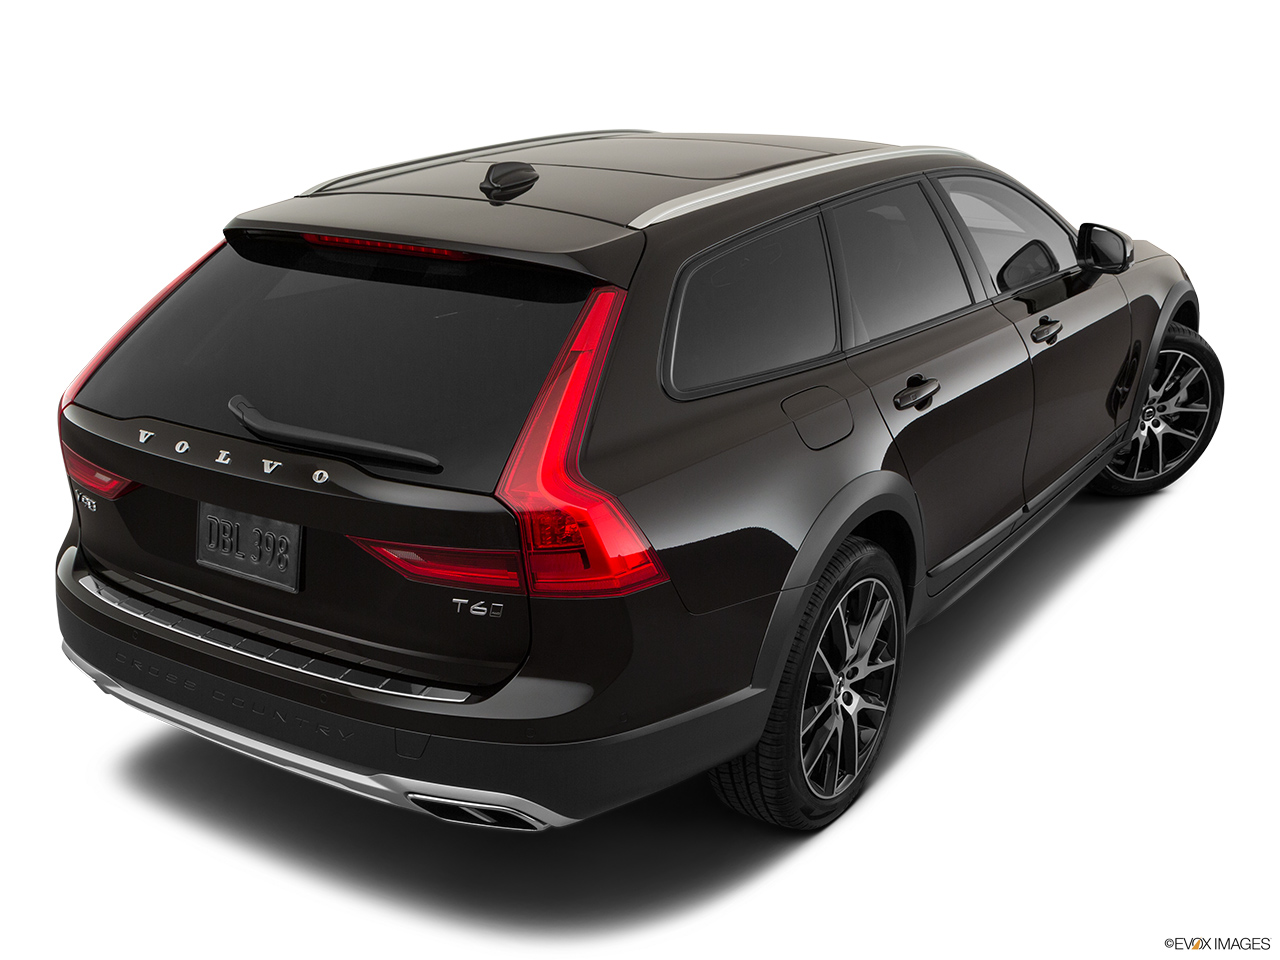 2020 Volvo V90 Cross Country T6 AWD Rear 3/4 angle view. 